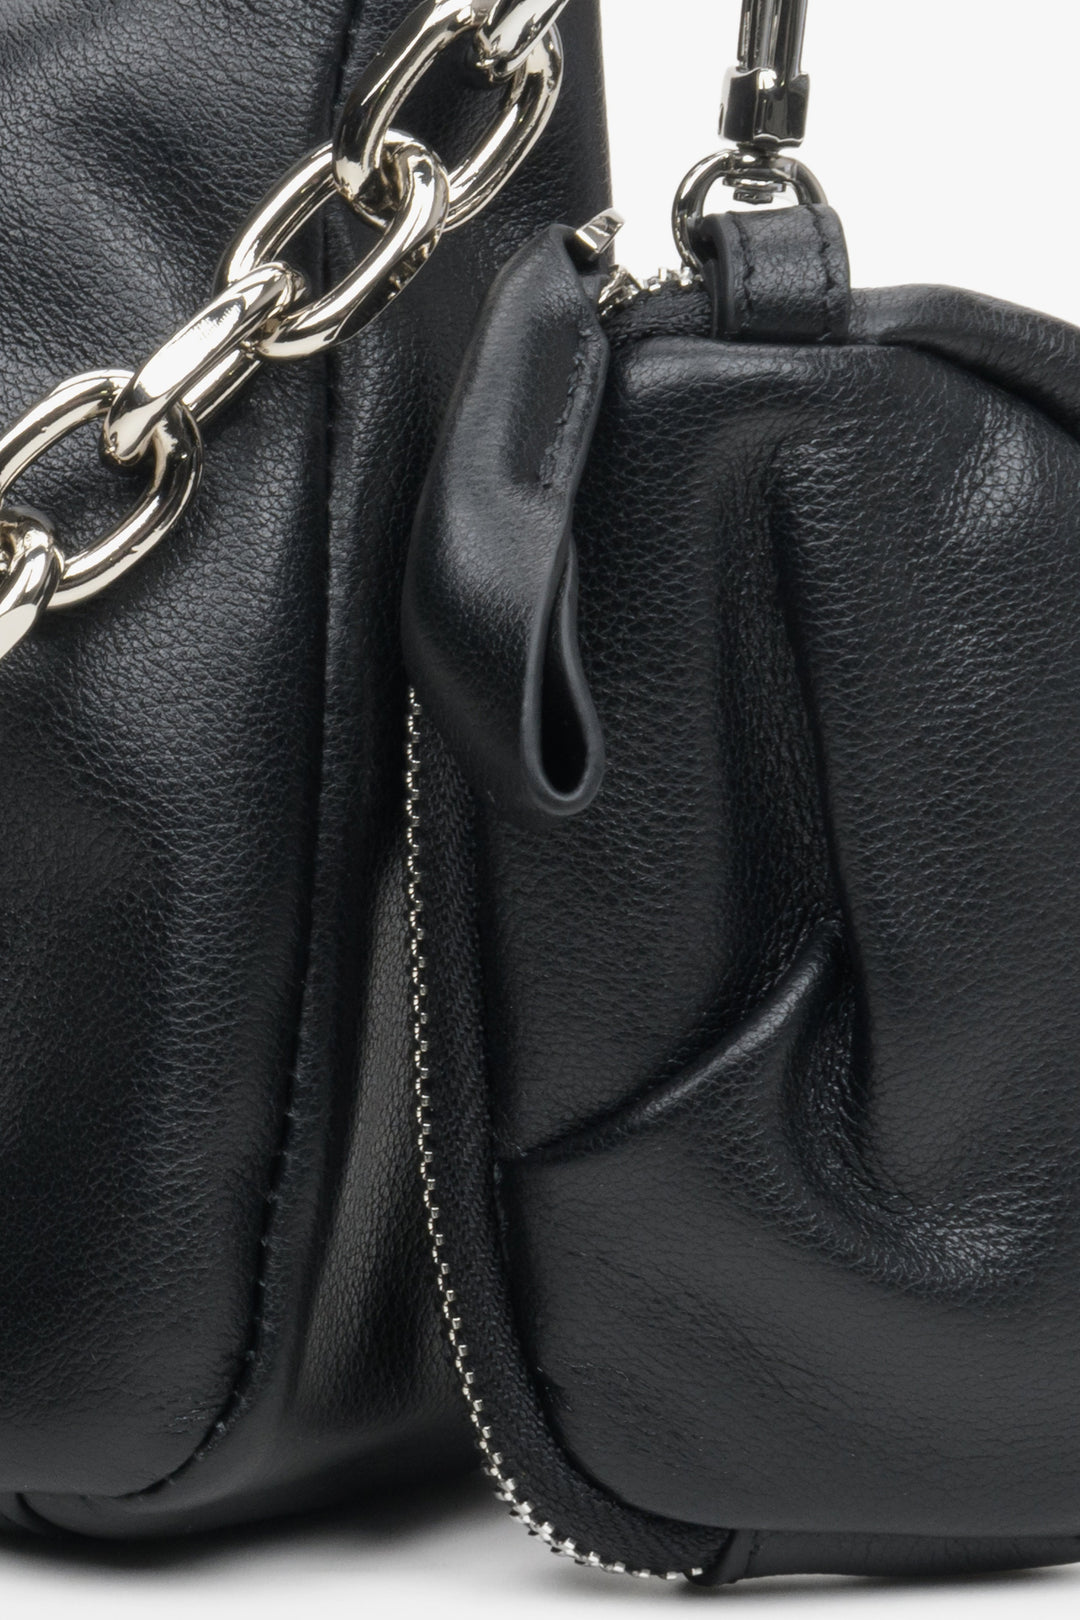 Small, stylish women's black leather bag with a chain strap - close-up of the additional pouch.